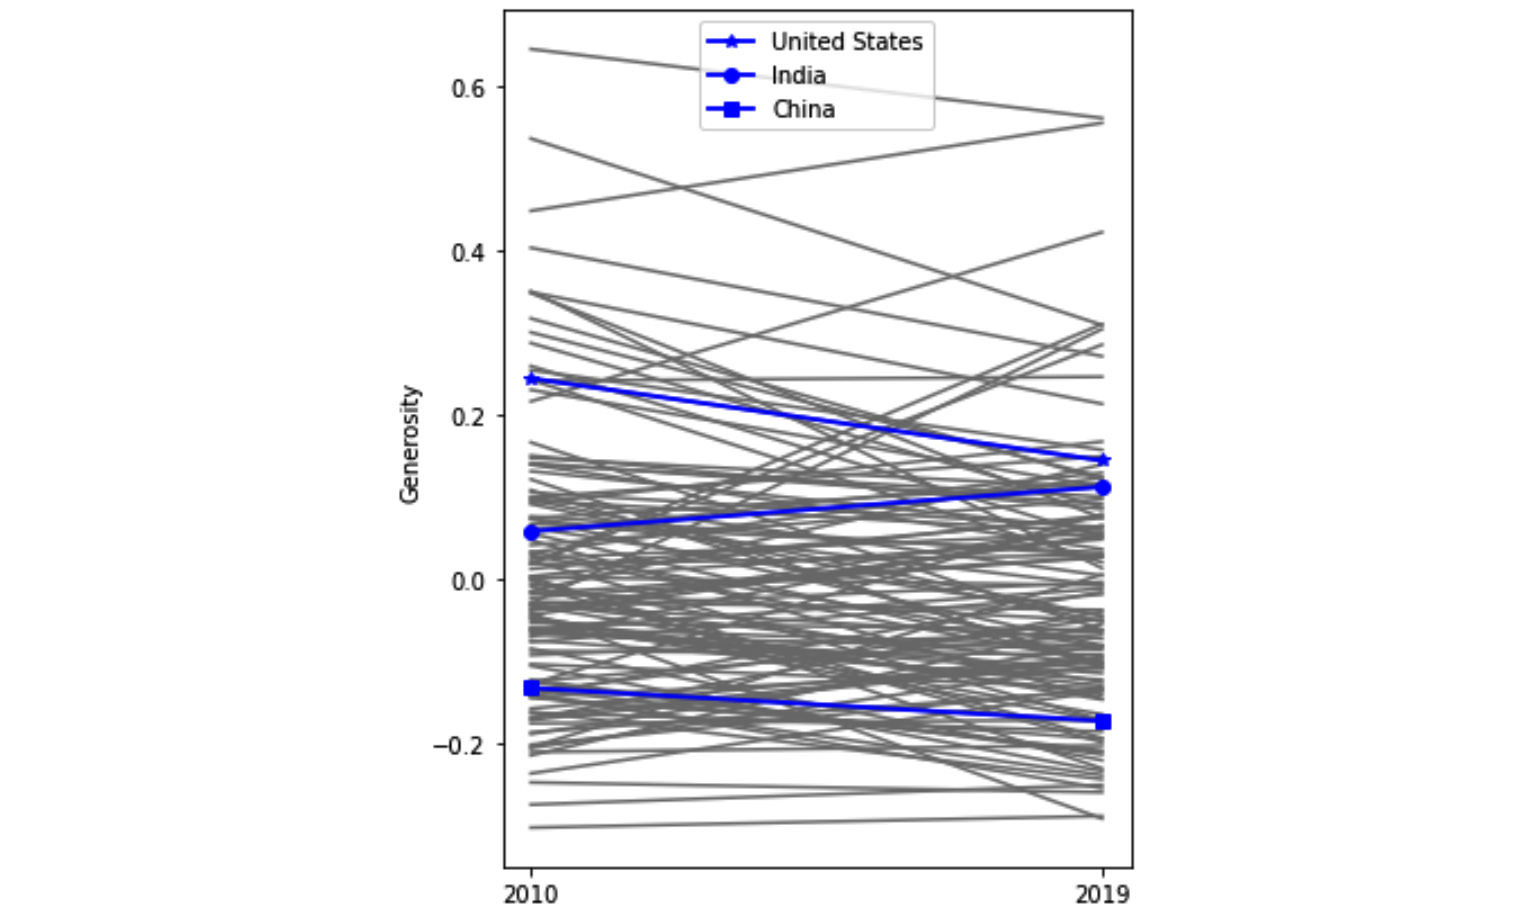 Figure 5.26 – Line plot comparing Generosity across all countries in 2010 and 2019 with an emphasis on the United States, India, and China
